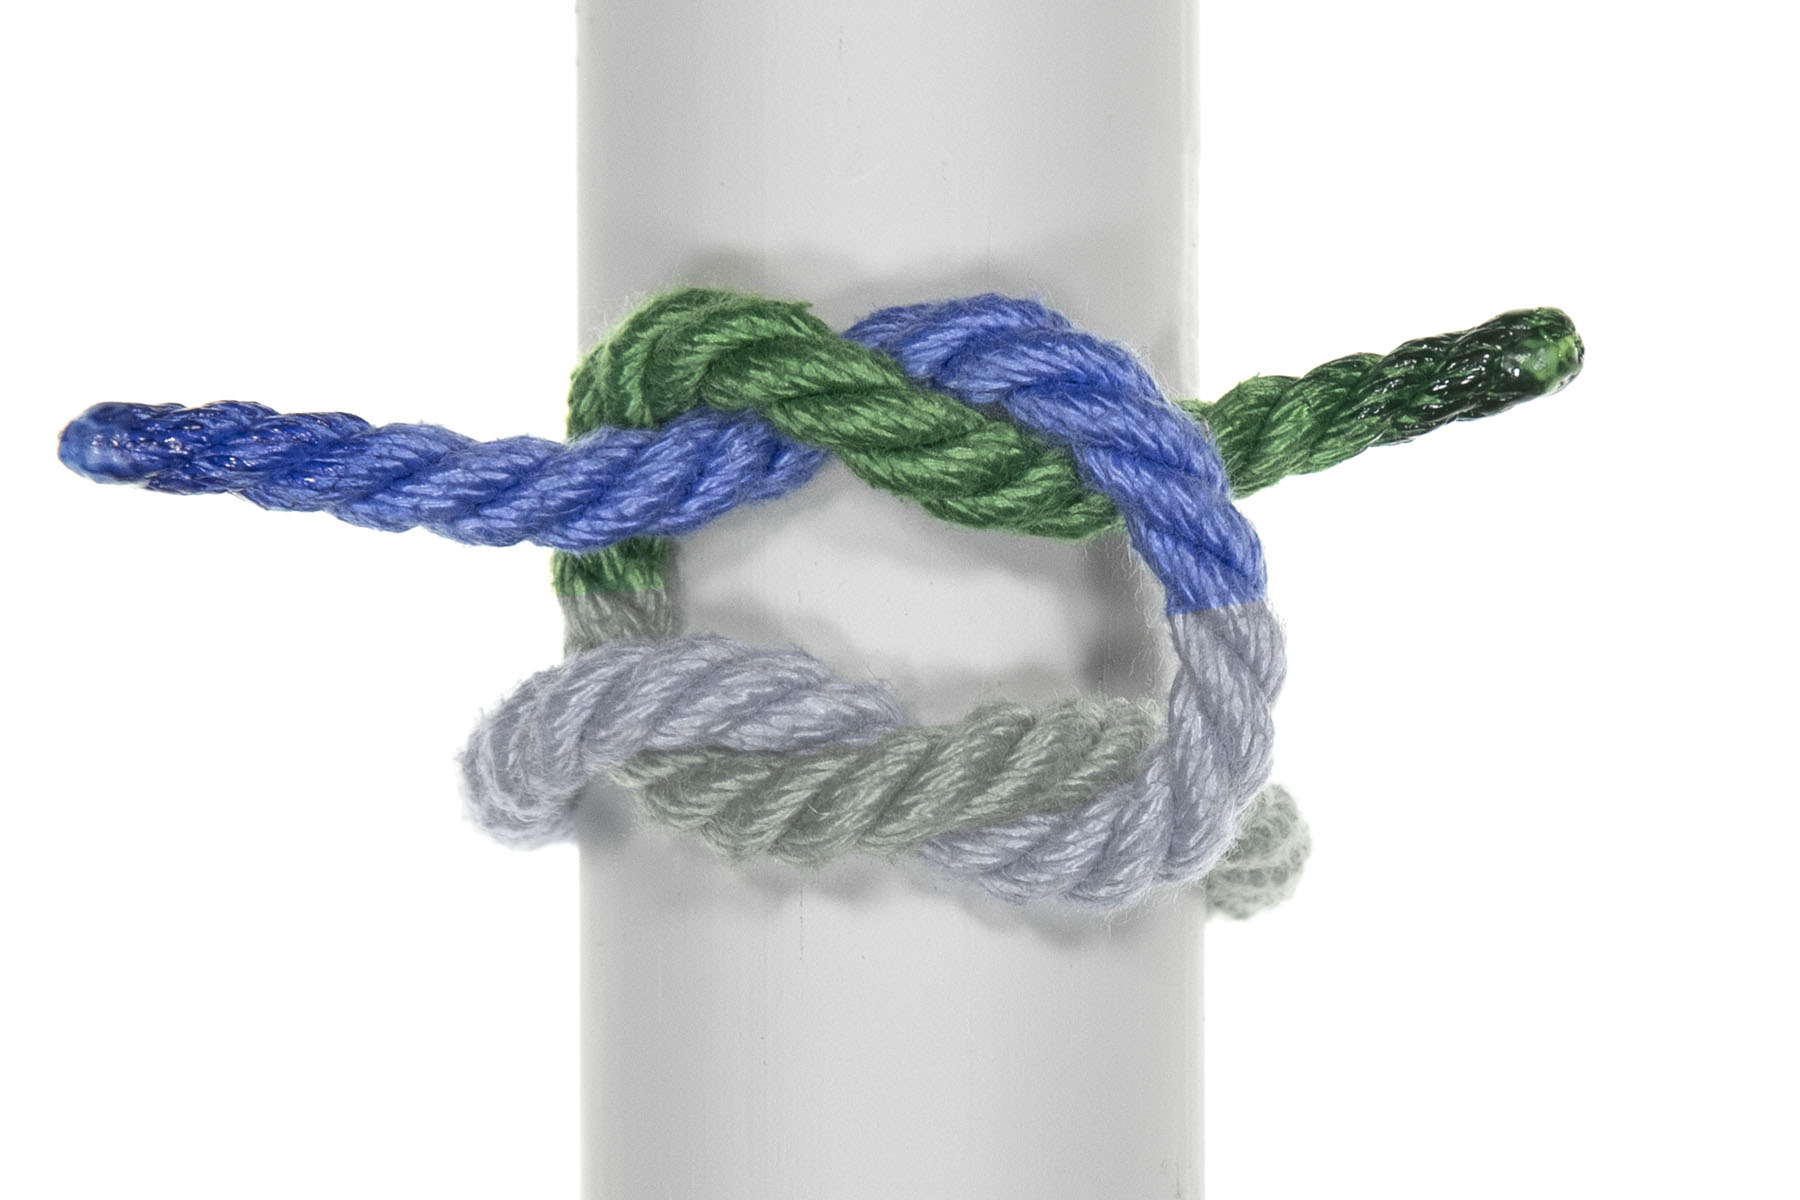 The blue rope has again been twisted around the green rope. The end of the blue rope goes over, under, and over the green rope, and the end of the green rope goes under, over, and under the blue rope.